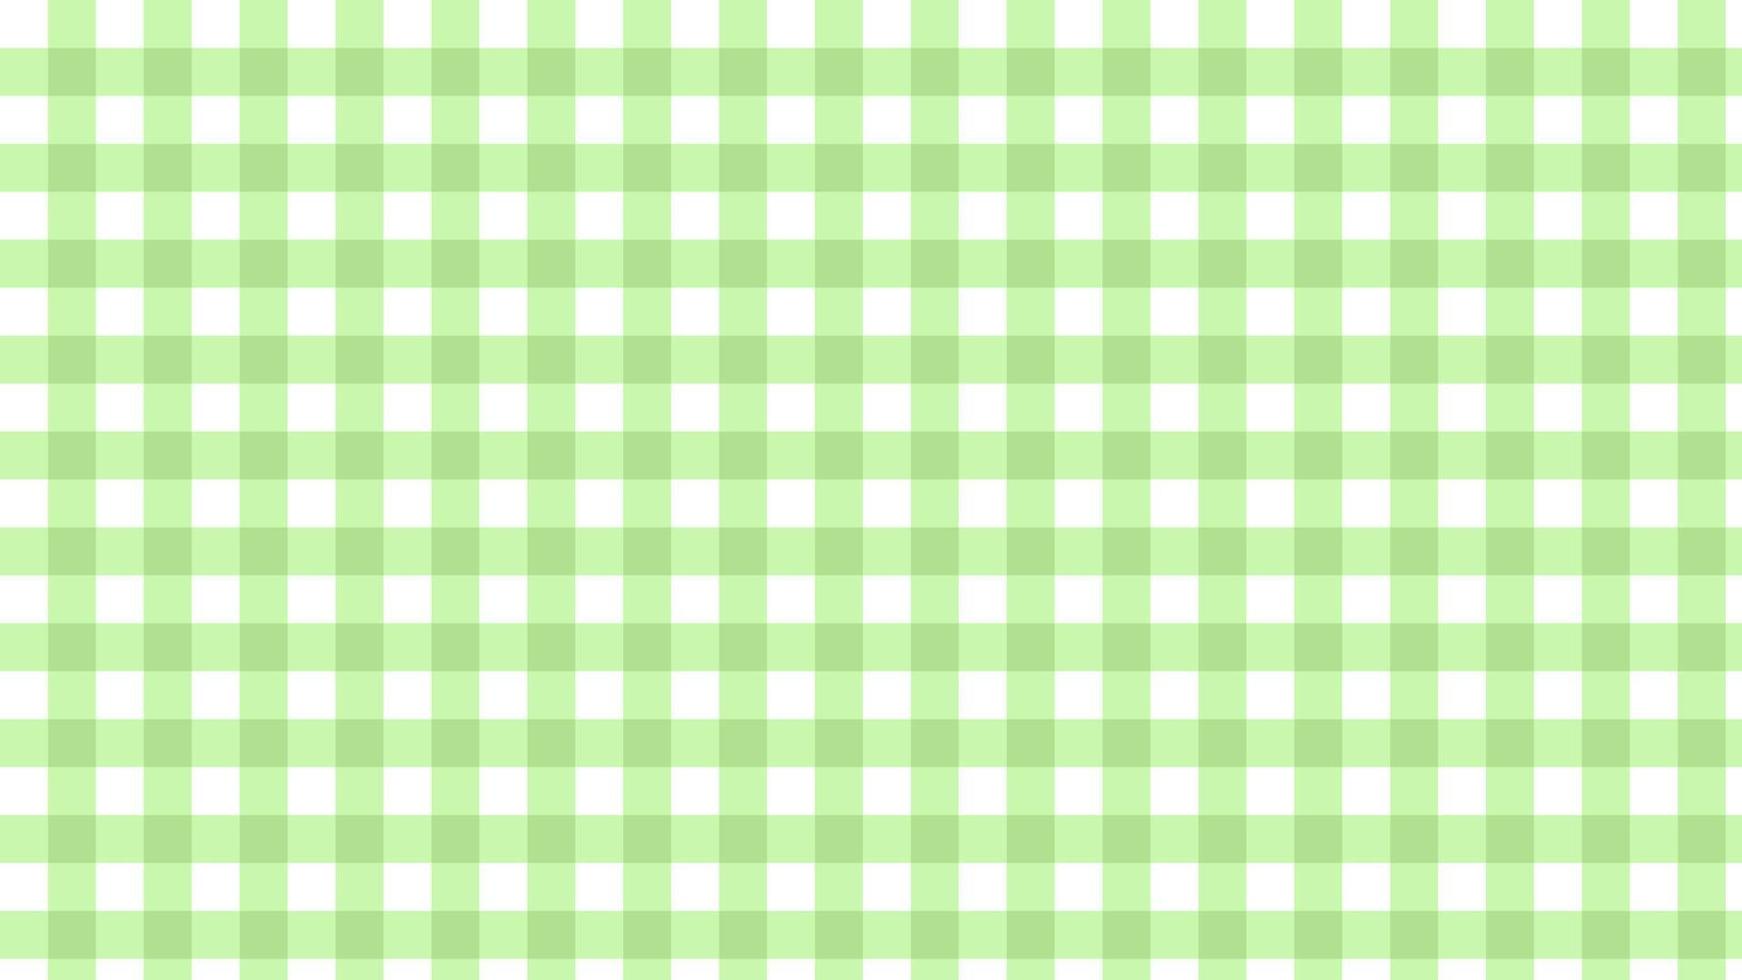 aesthetic cute pastel green gingham, checkerboard, plaid, tartan pattern background illustration, perfect for wallpaper, backdrop, postcard, background for your design vector